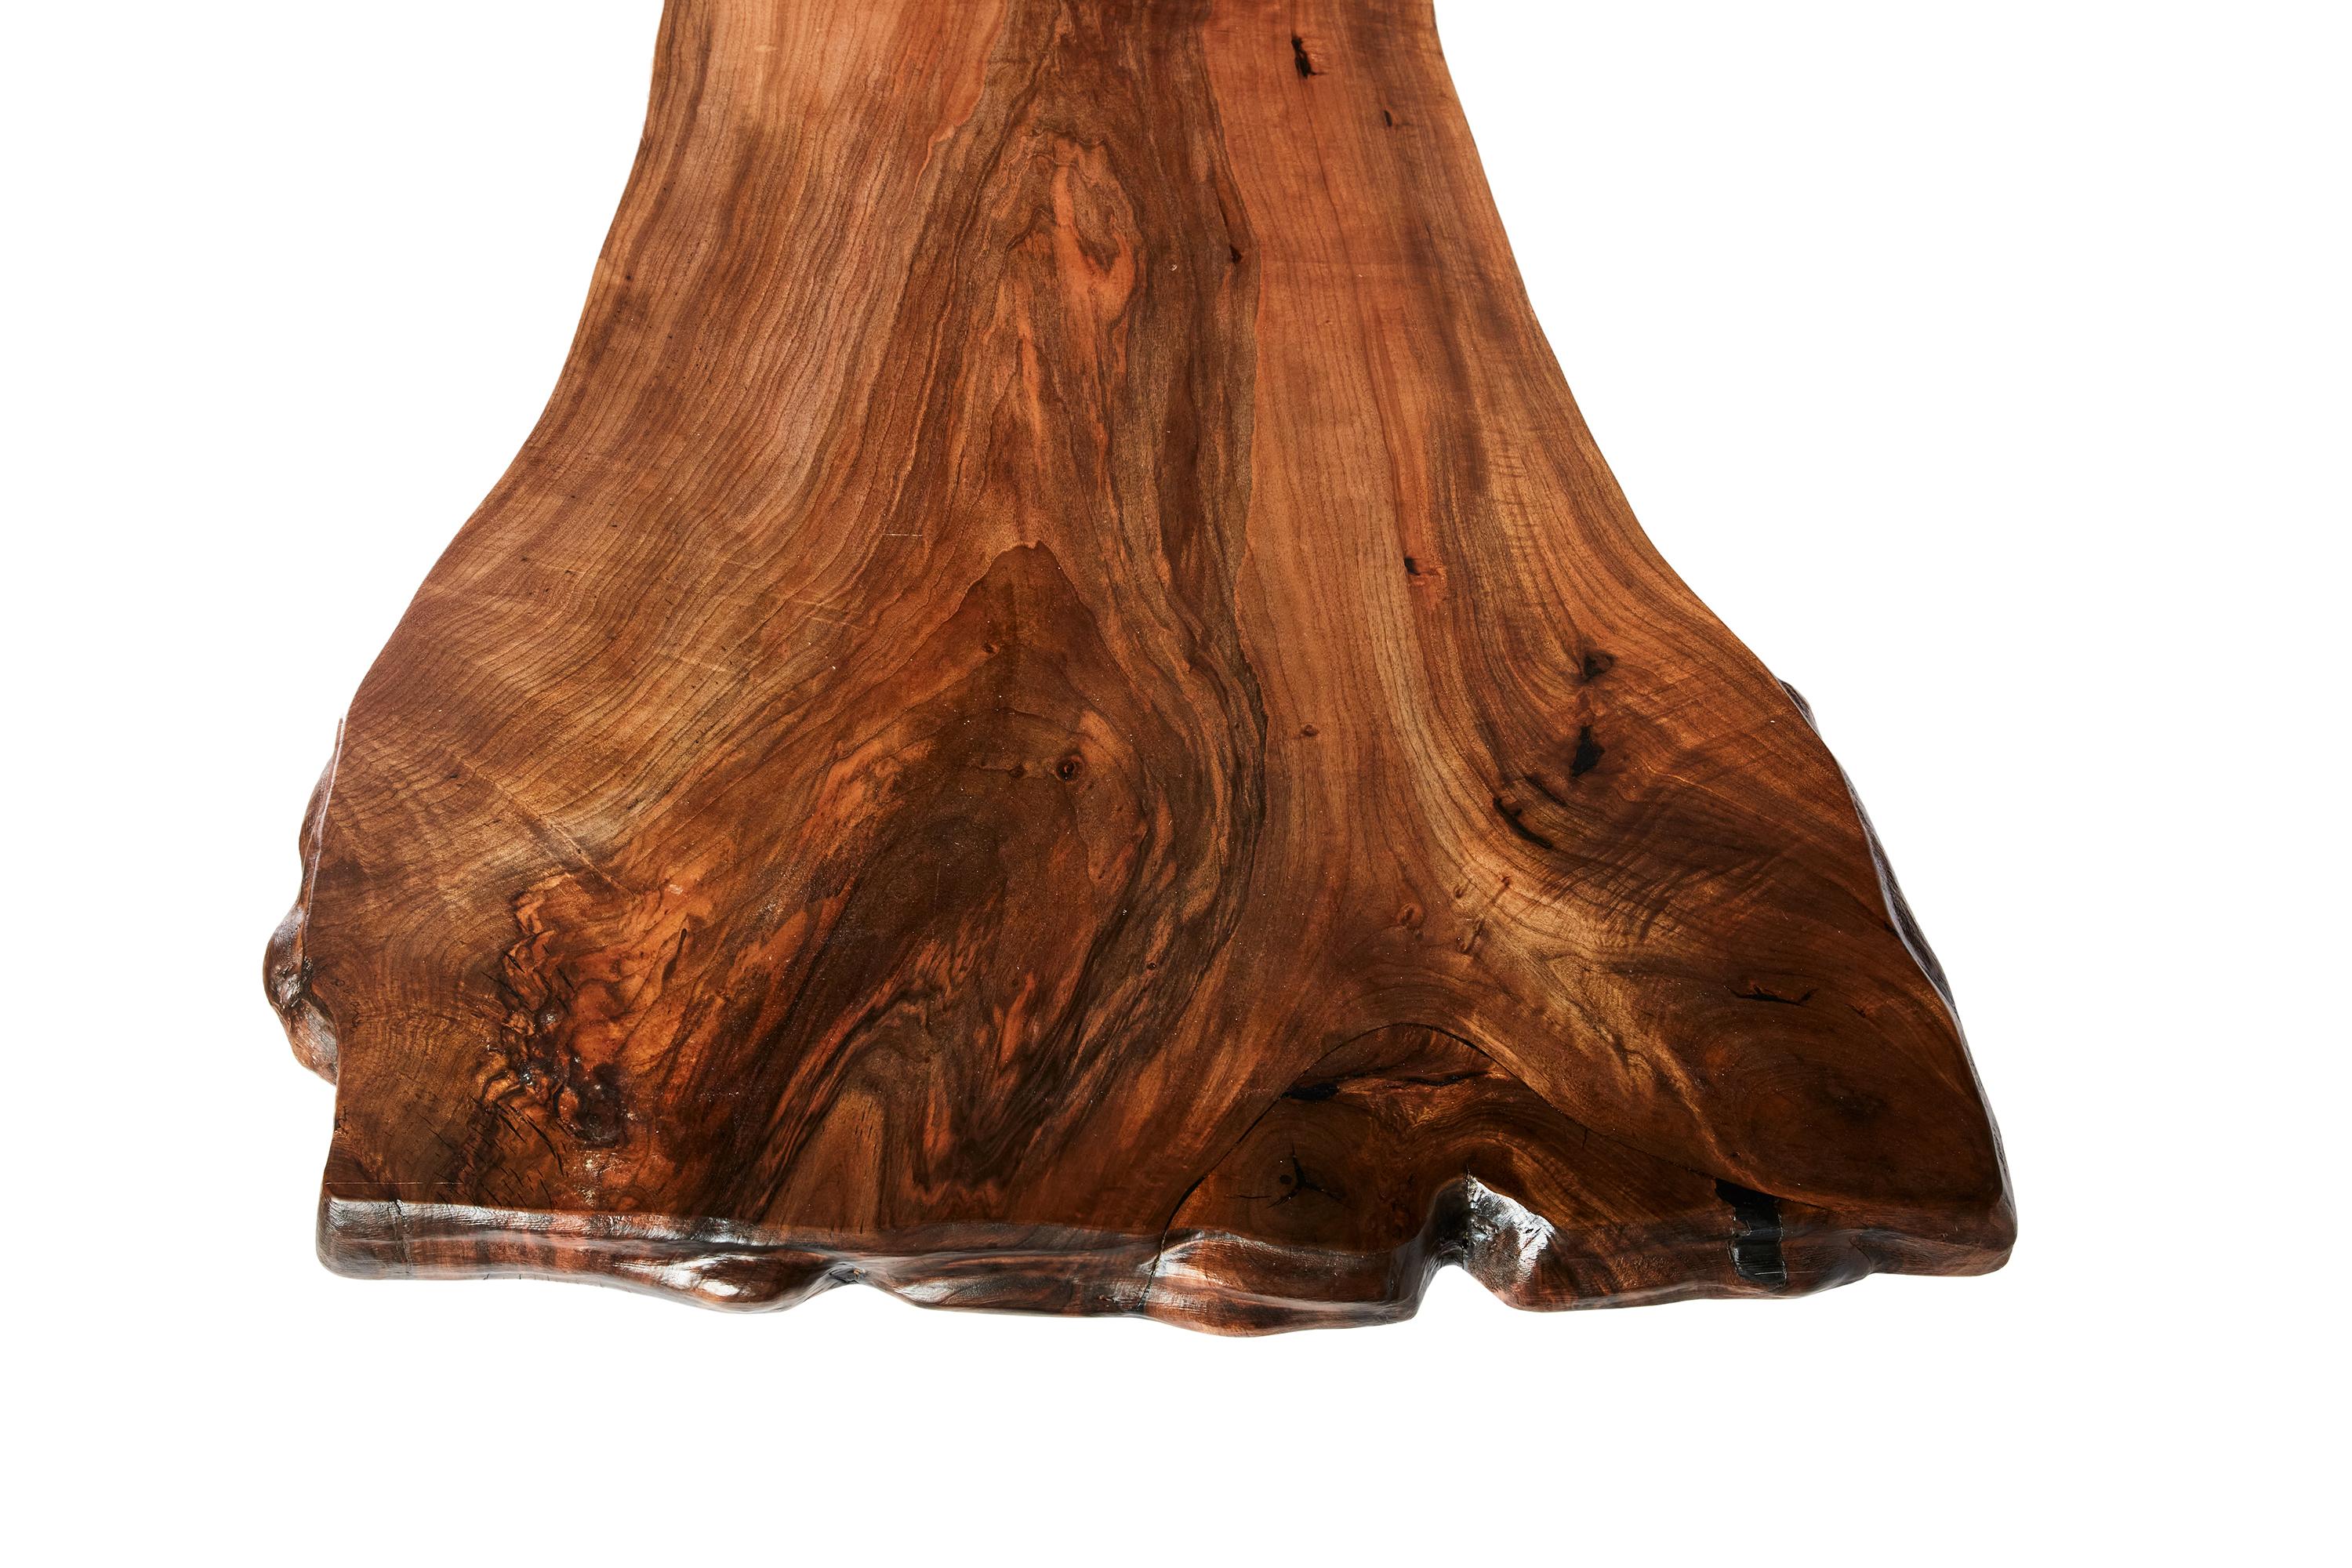 The stunning walnut table shown here was made in Ankara, Turkey with wood gathered walnut wood from the forests of the Mediterranean. The wood is kilned and dried prior to being filled with high quality resin in areas of natural cracking. There are